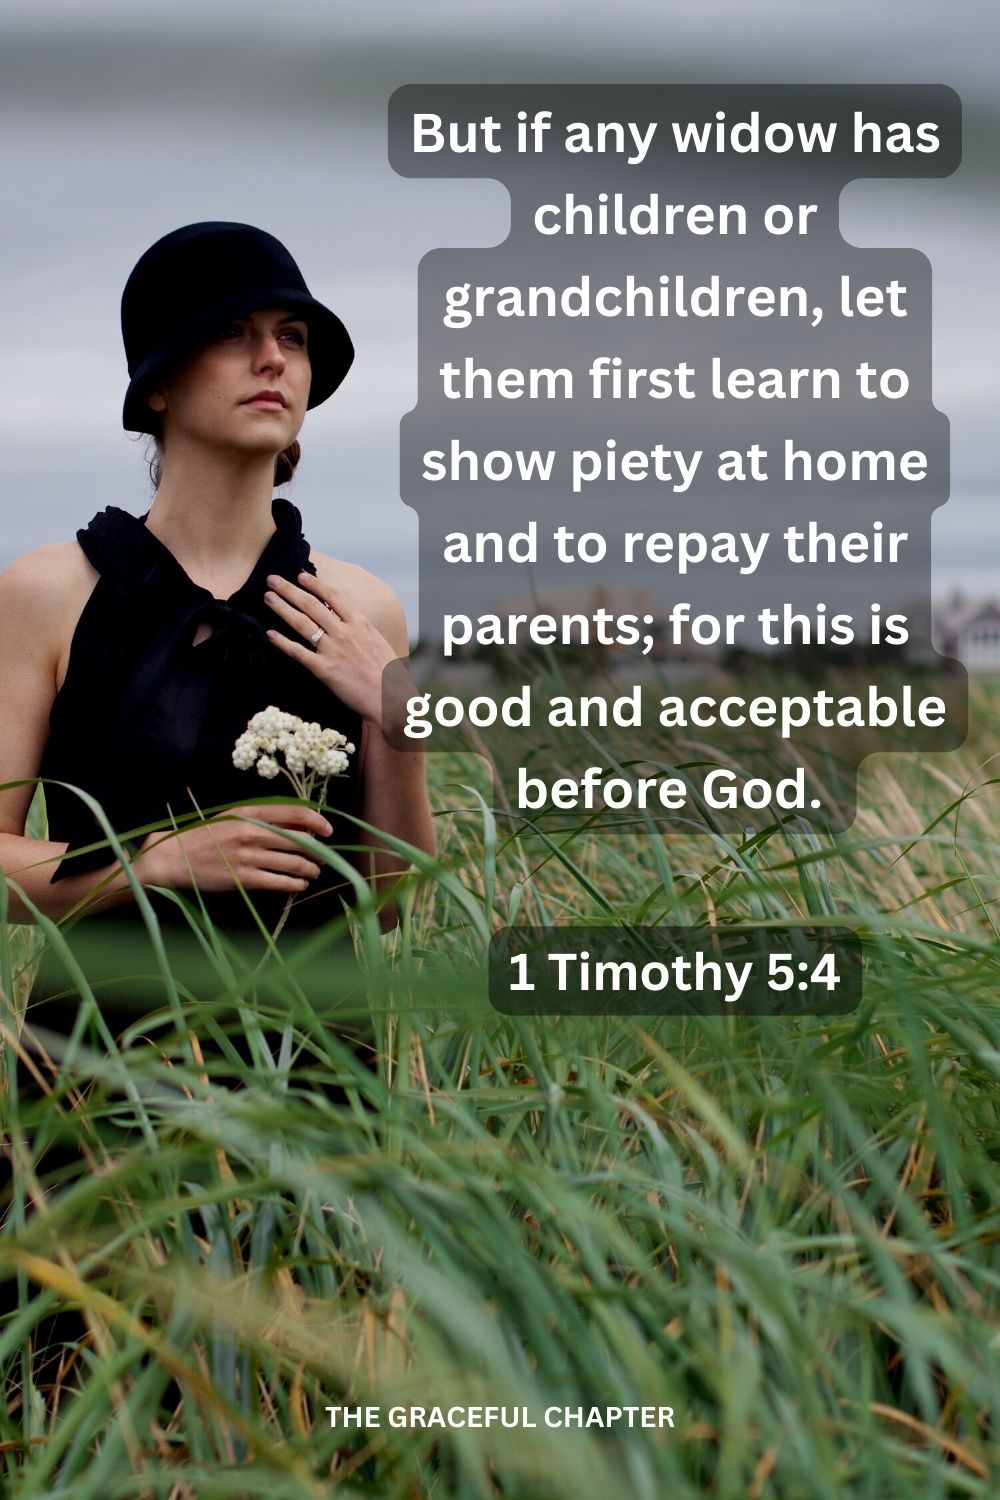 But if any widow has children or grandchildren, let them first learn to show piety at home and to repay their parents; for this is good and acceptable before God. 